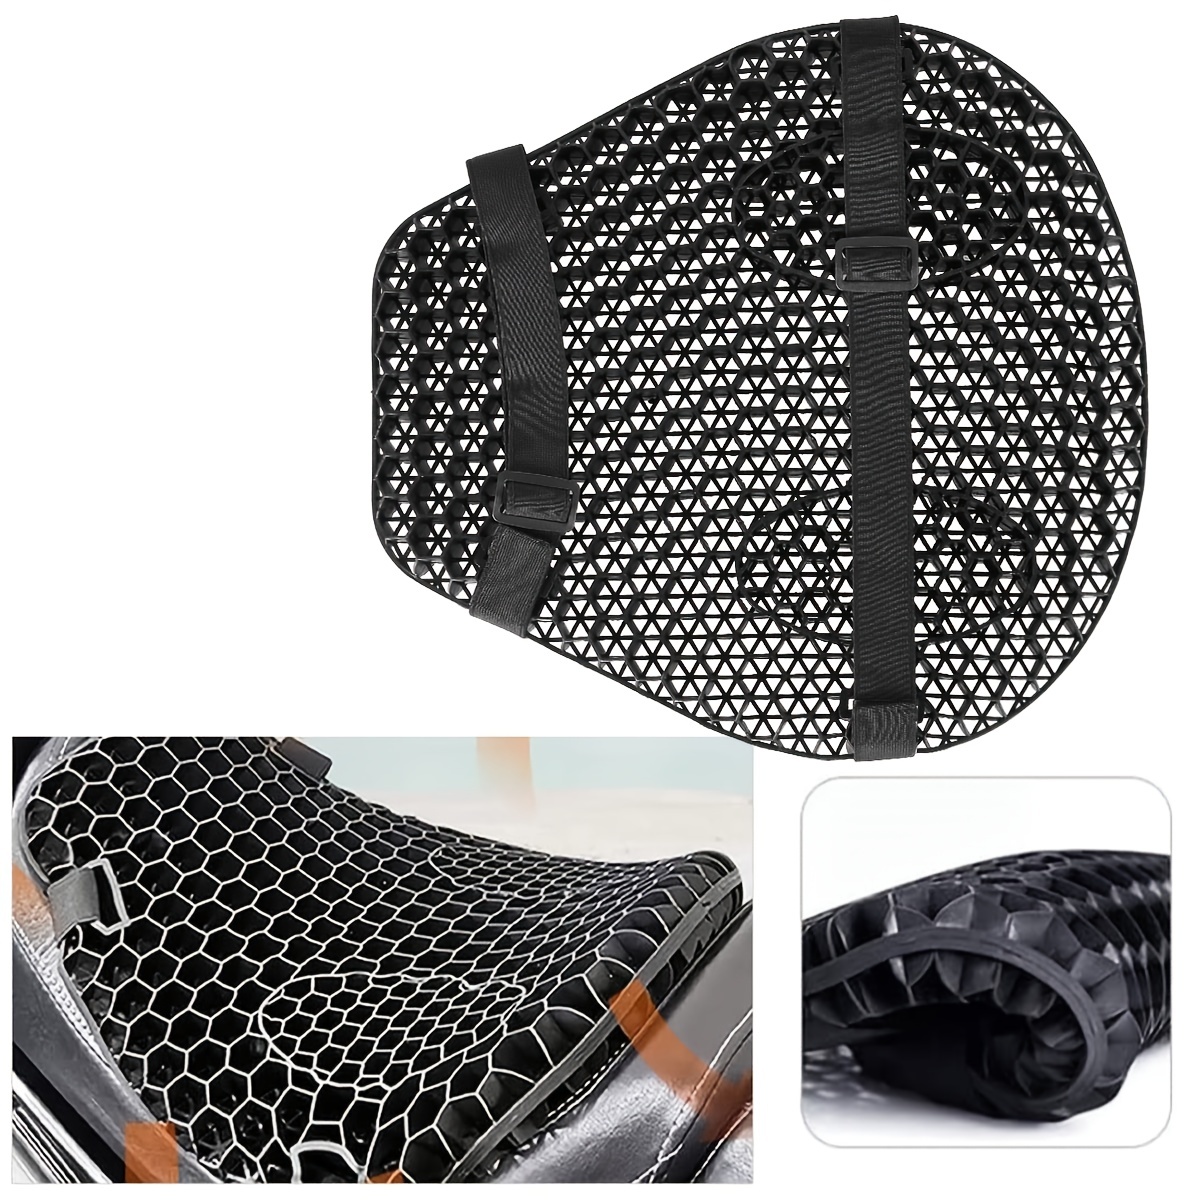 uywapvt Motorcycle Seat Cushion Gel Shock Absorption 3D Honeycomb Mesh  Breathable Motorbike Seat Pad Quick-Drying Protective Ride Saddle Seat  Cover